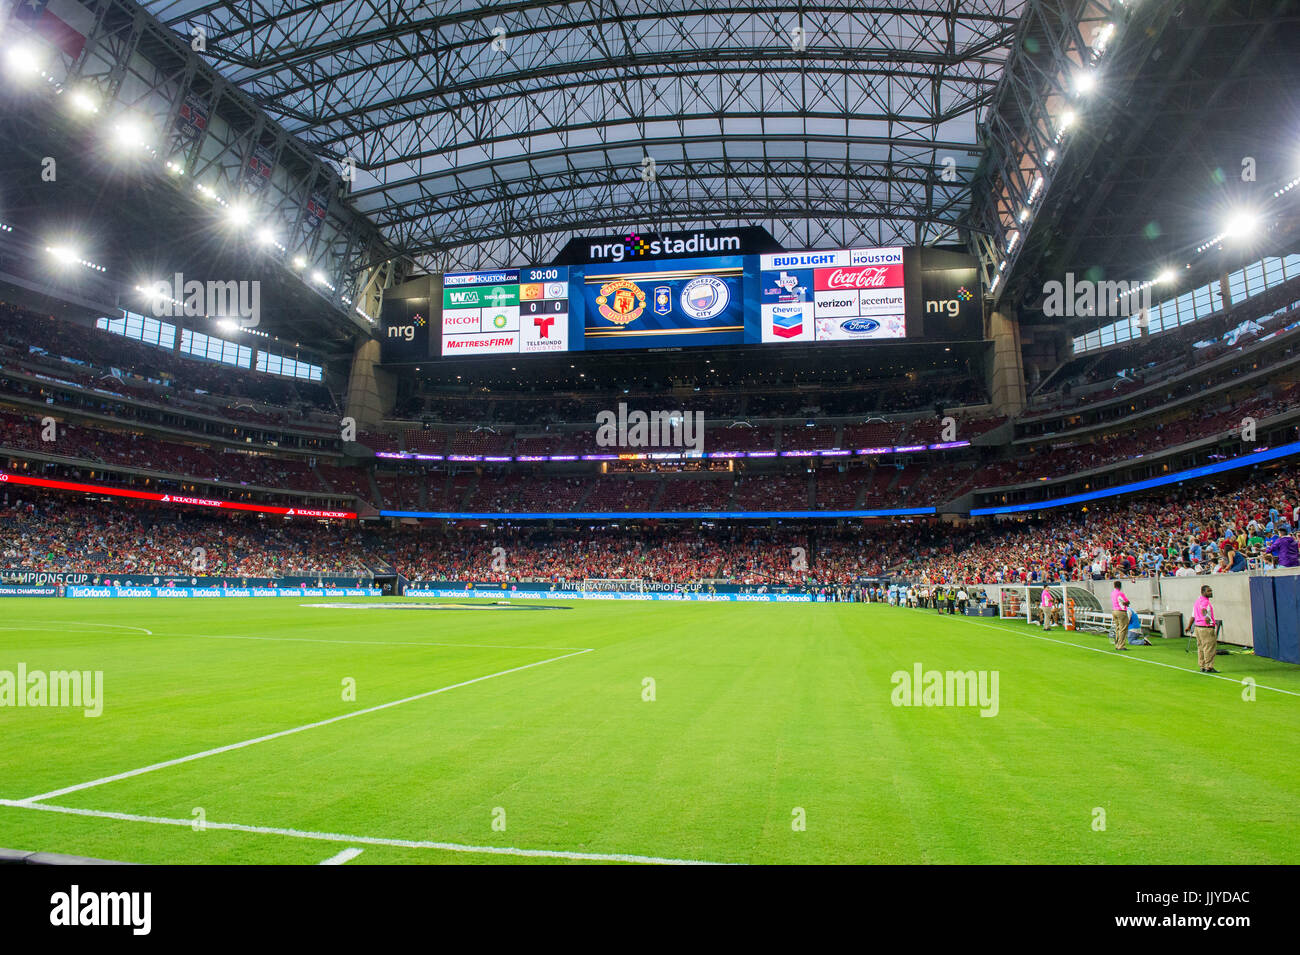 Houston, TX, USA. 20th July, 2017. A general view of NRG Stadium from the  pitch prior to the International Champions Cup soccer match between  Manchester United and Manchester City in Houston, TX.